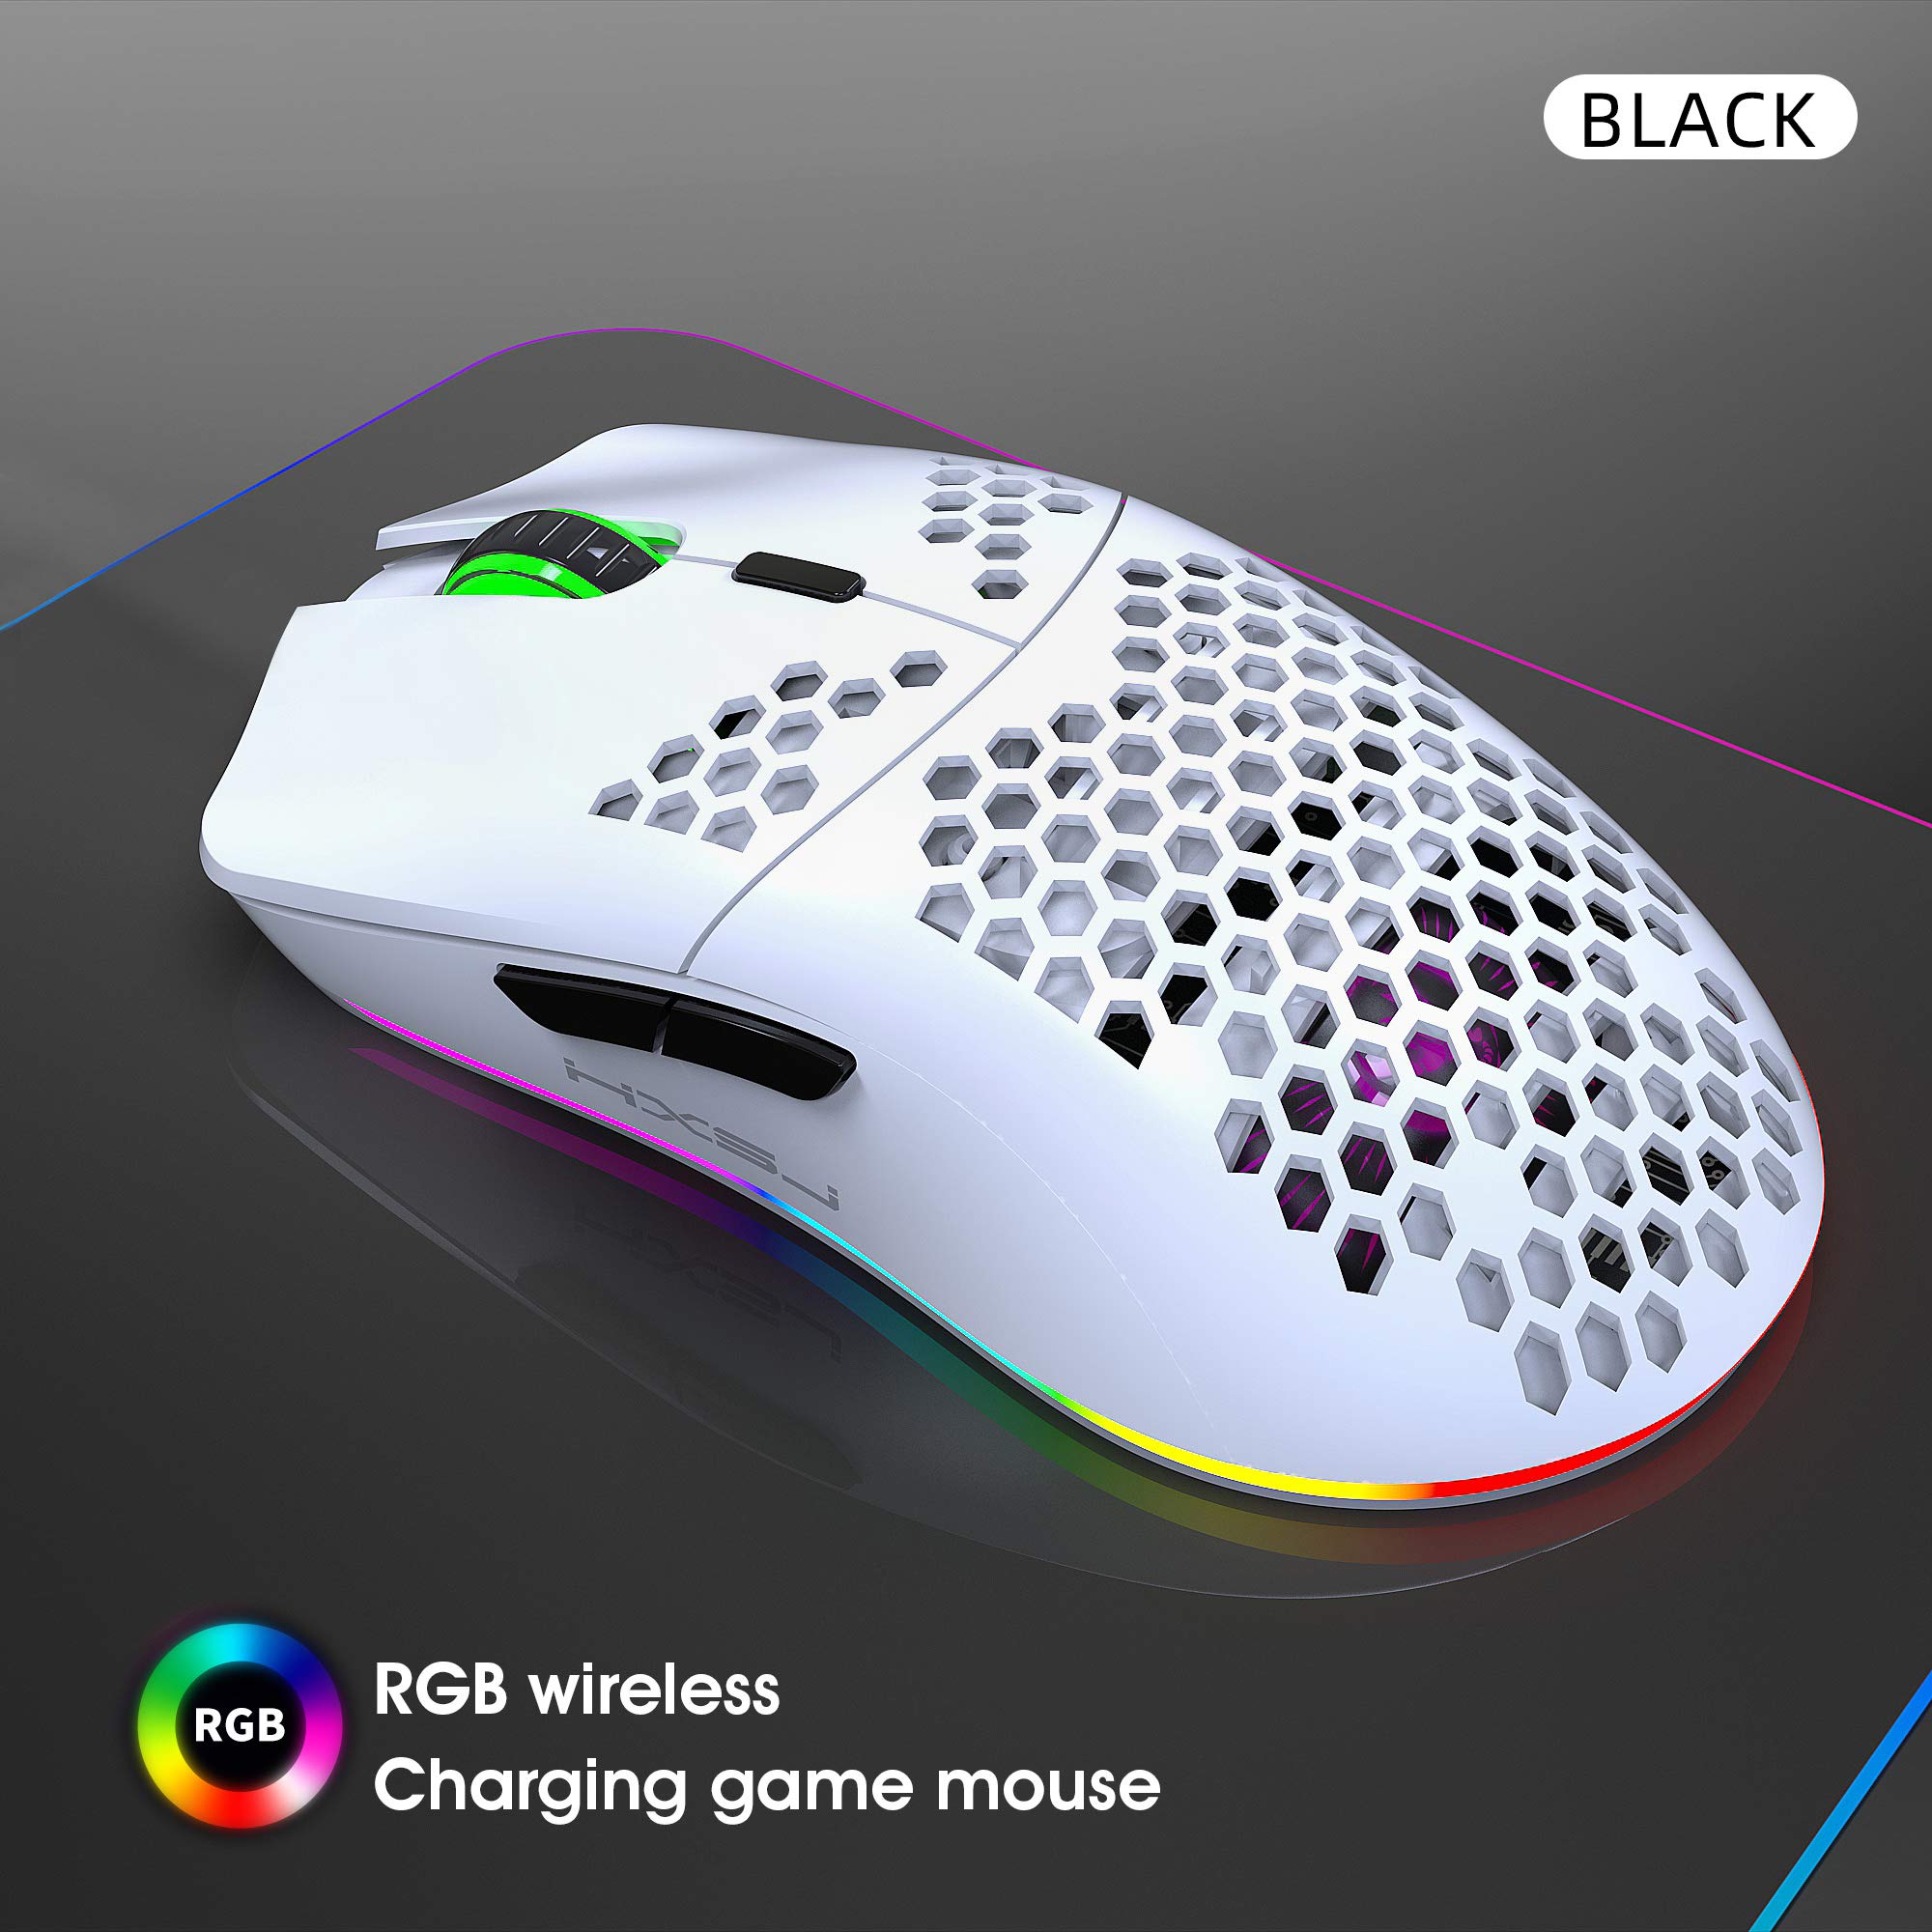 Mua Wireless Gaming Mouse,  Lightweight Honeycomb Shell Ergonomic RGB  Mice with 750mAh Rechargeable Battery, Energy Saving, 6 Buttons & Mini USB  Receiver for Windows, Mac OS, Laptop, Smart TV(White) trên Amazon